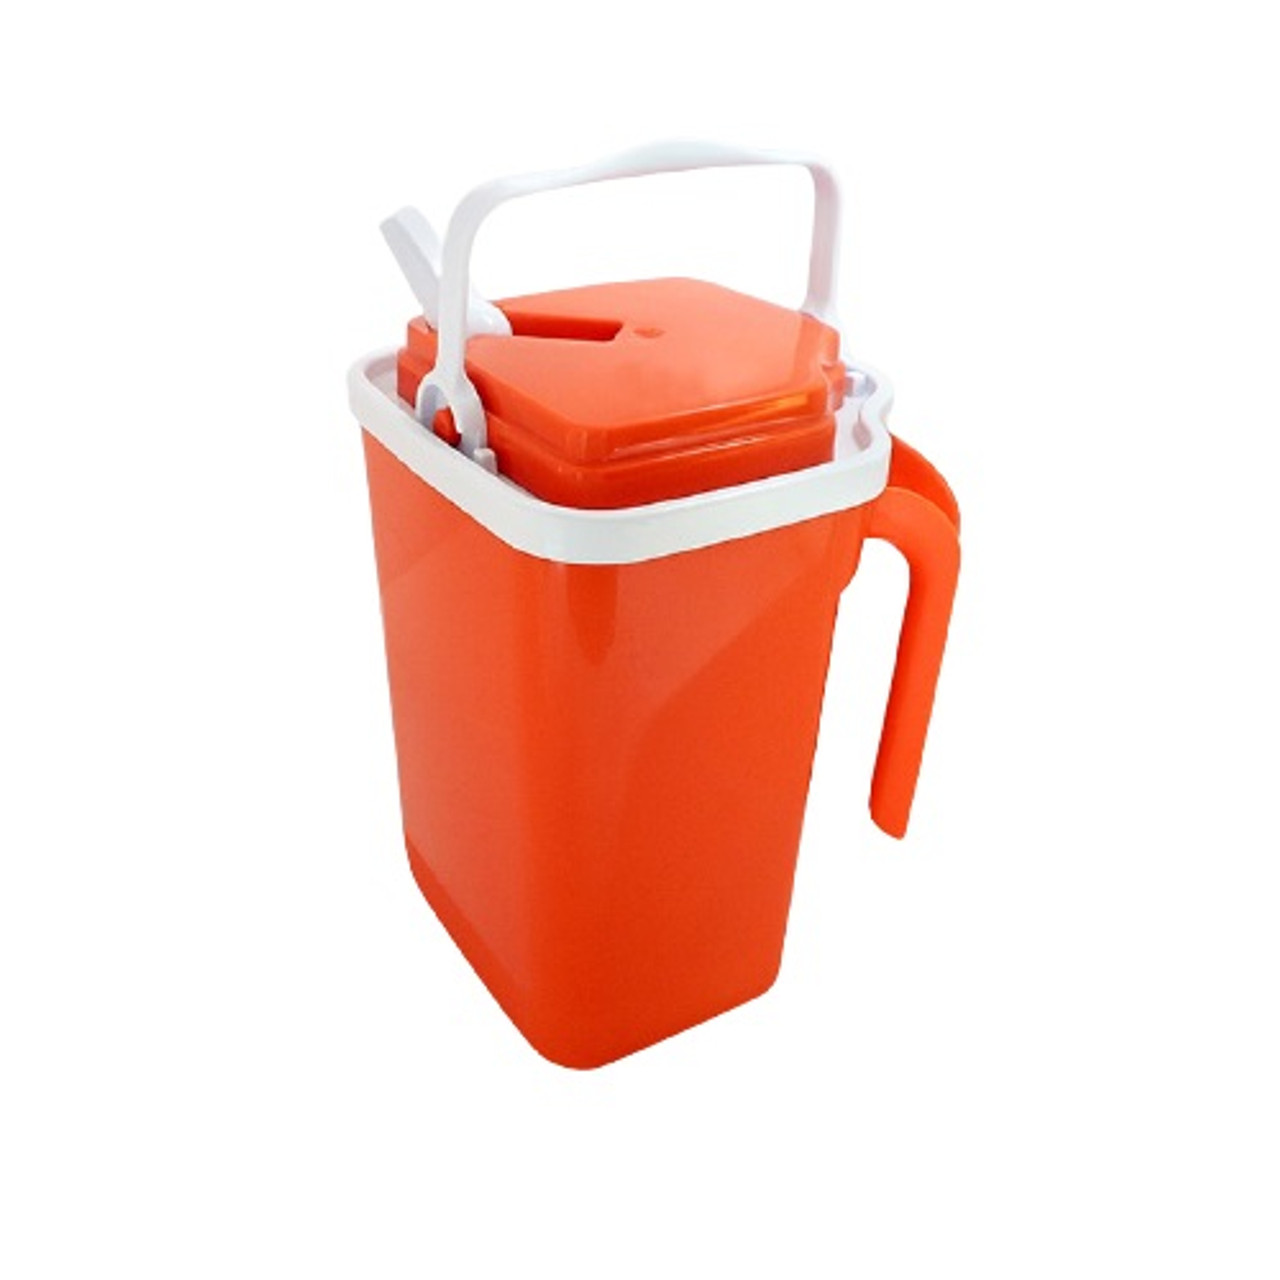 Termo Camping Con Pico Vertedor Dispenser Beverage Cooler Perfect for  Picnics for Cold & Hot Drinks